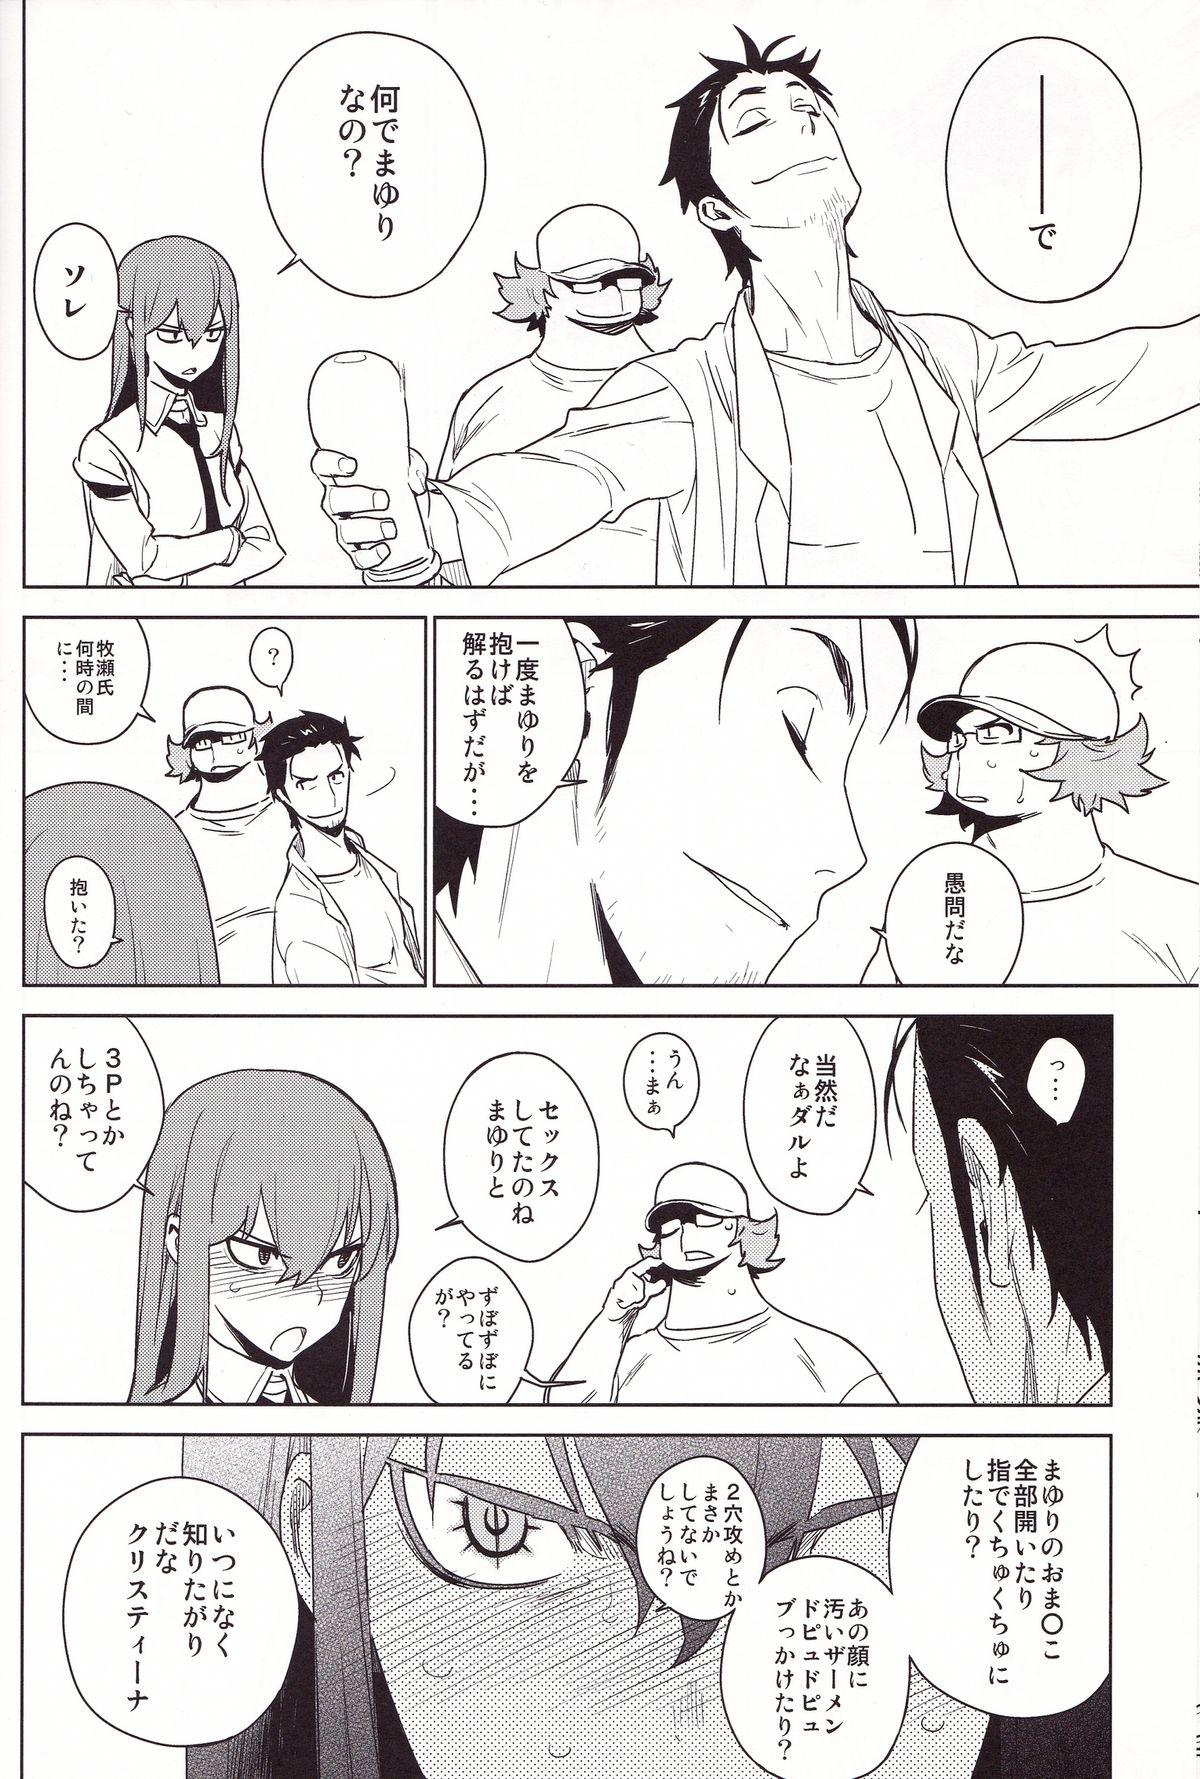 Best Blowjob OMD - Steinsgate Celebrities - Page 10